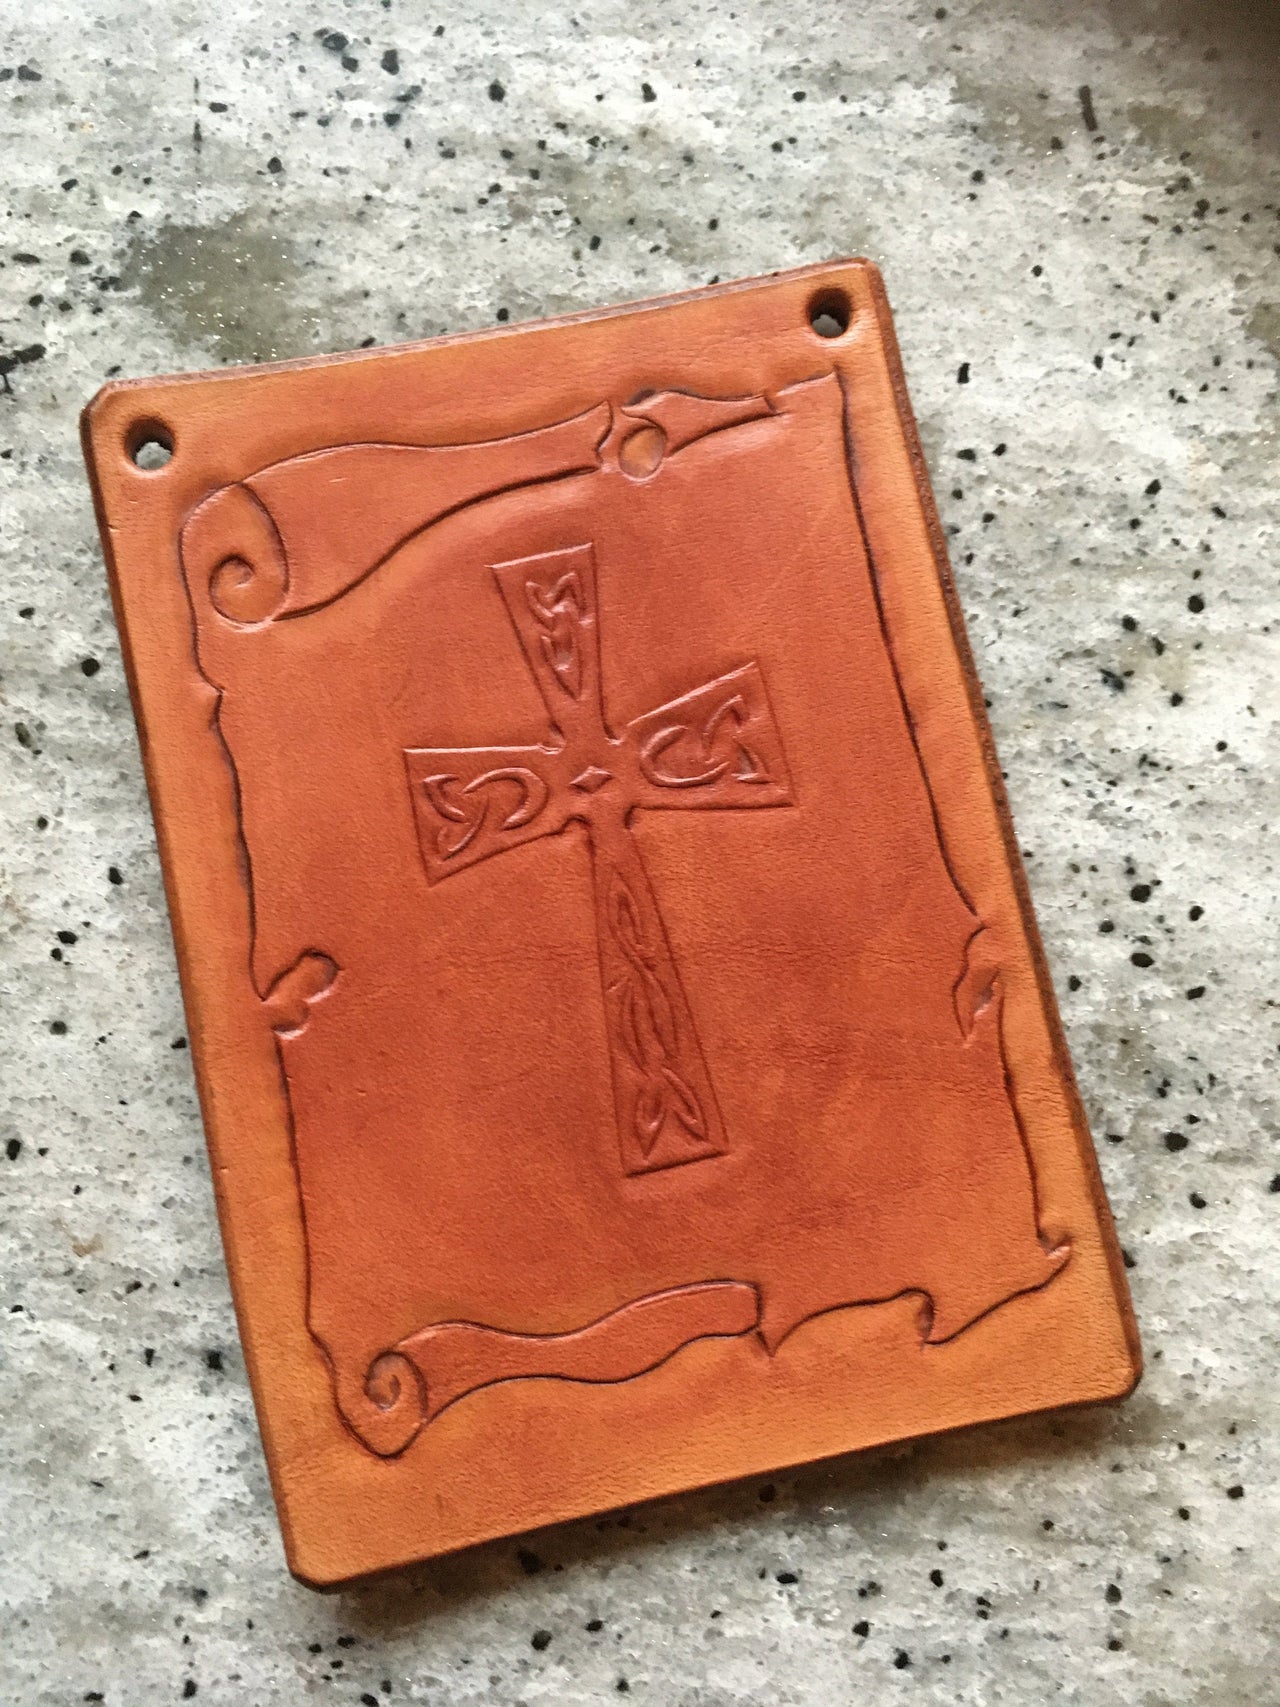 Cornish, Gaelic Celtic Crosses and Knot Work, Hand Carved on Miniature Leather Tablets